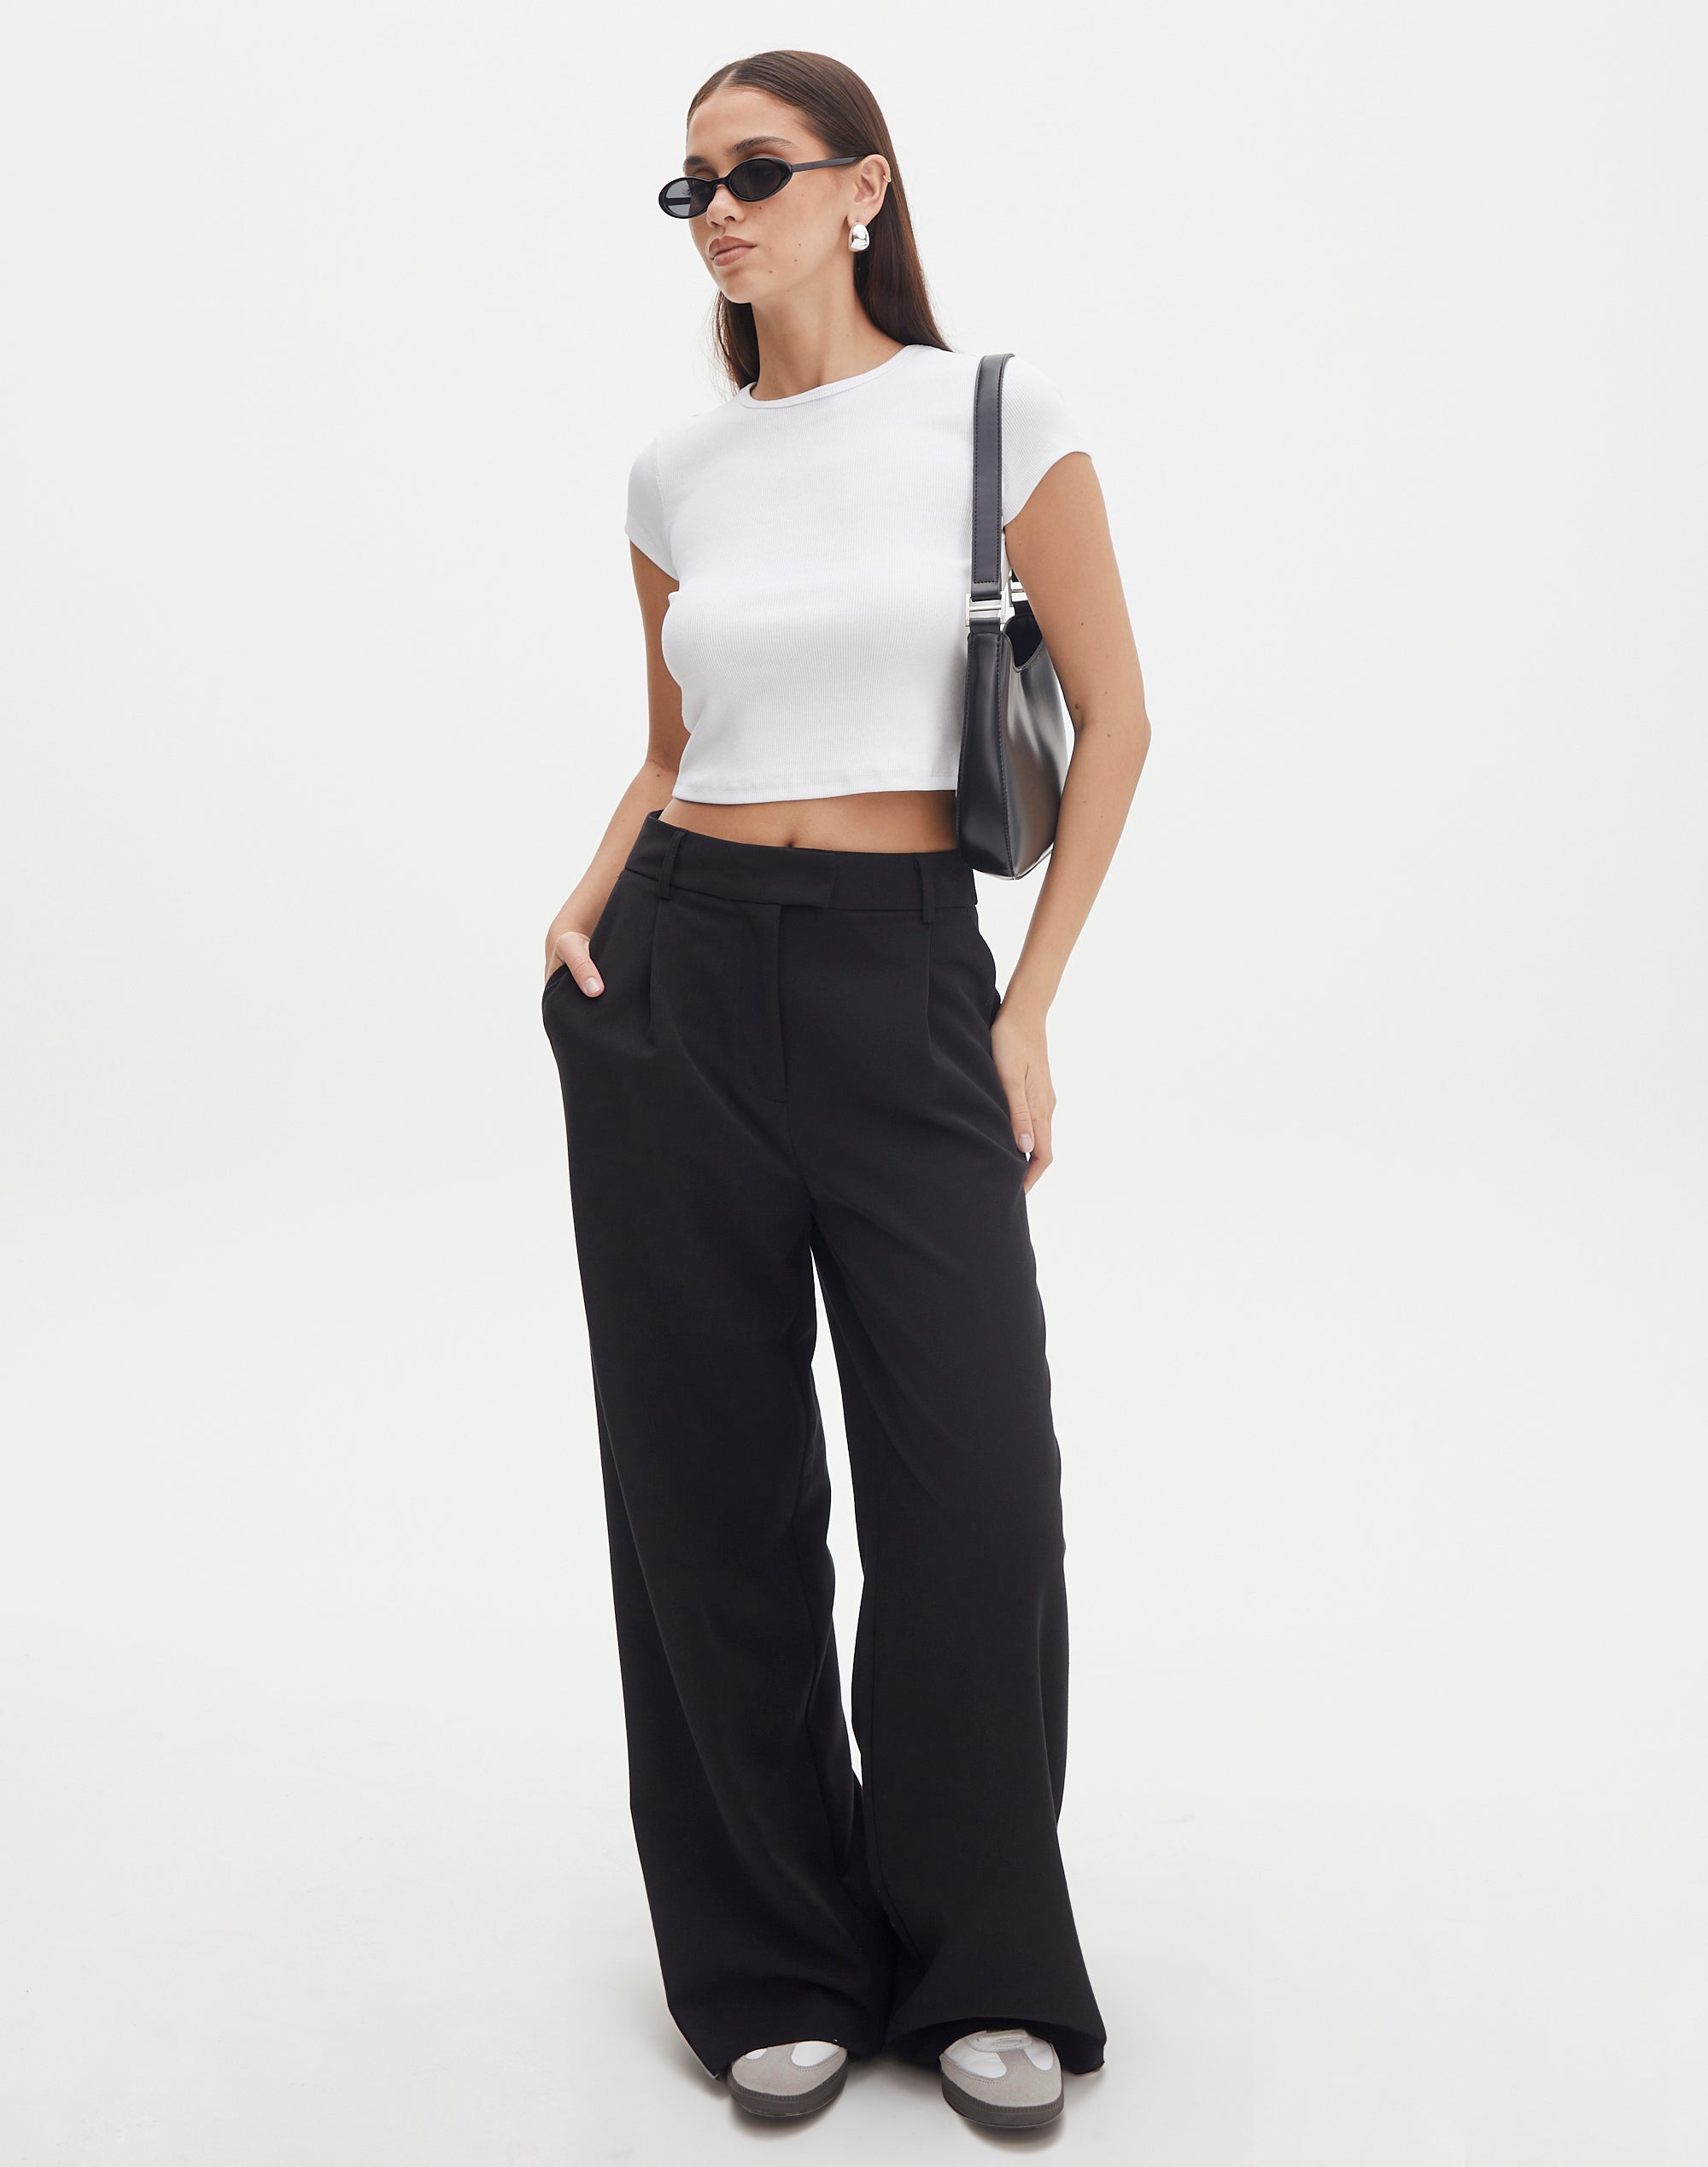 Petite Camel Crepe High Waist Wide Leg Tailored Trousers | New Look